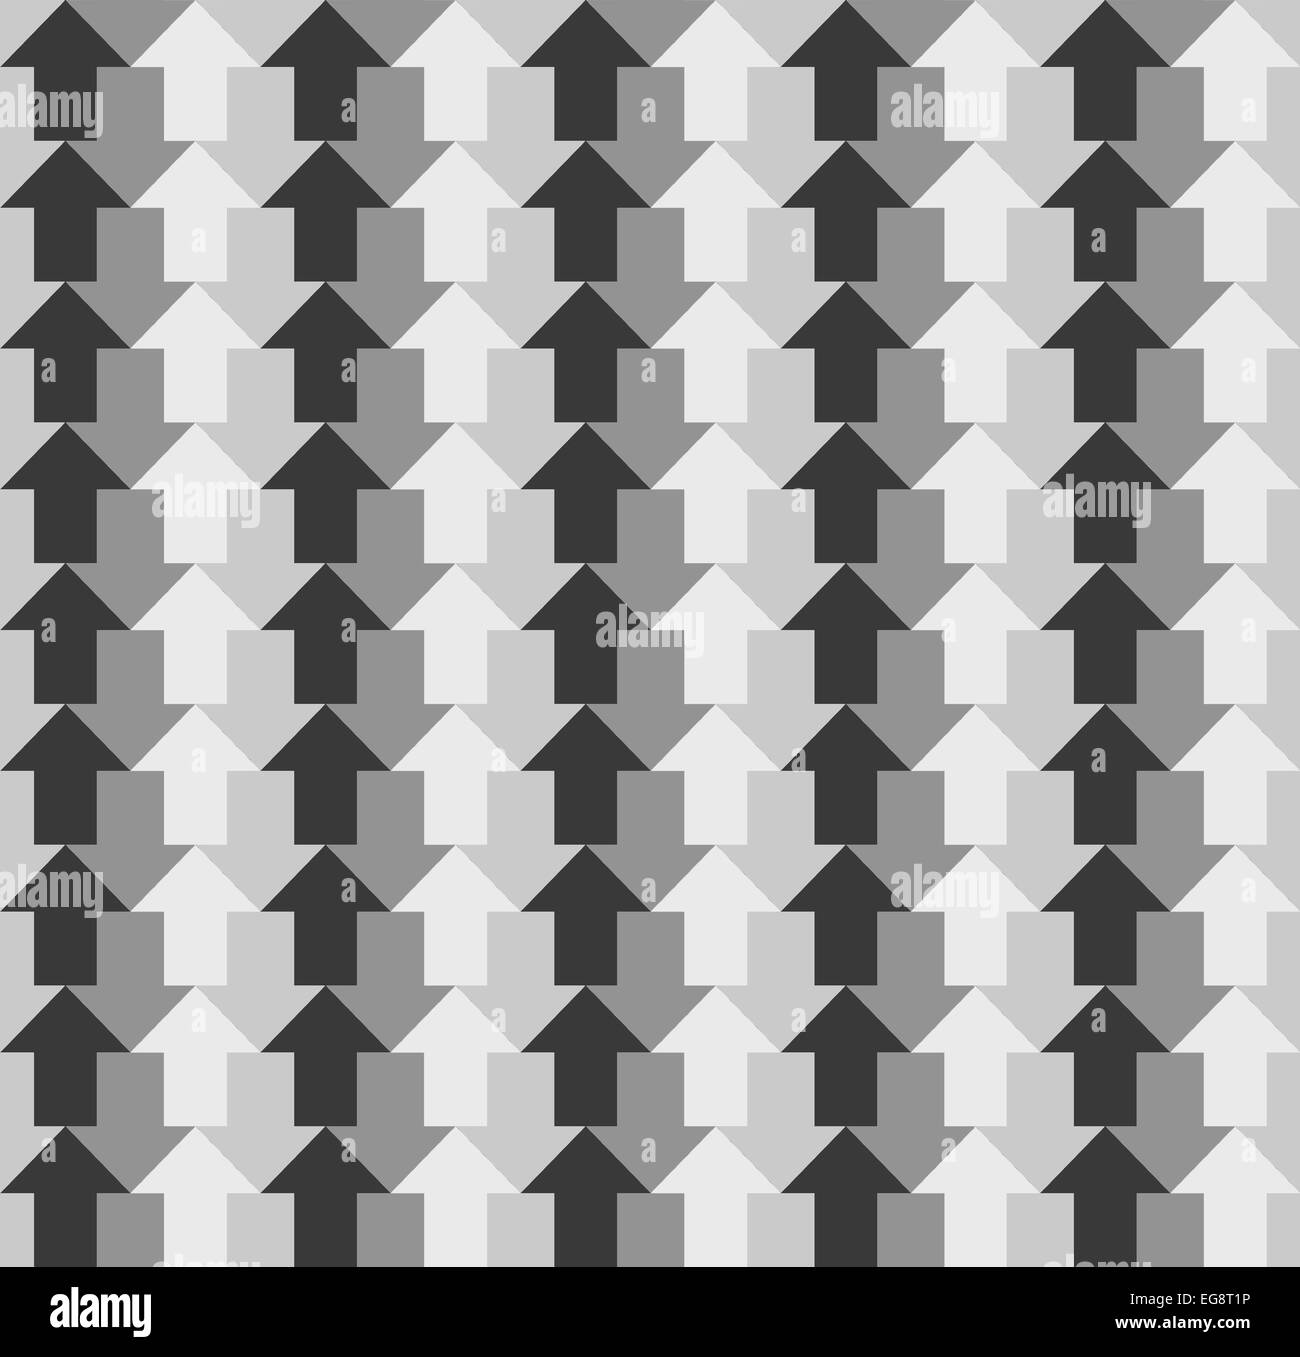 Arrows in four shades of gray pointing to opposite directions, a seamless pattern Stock Photo